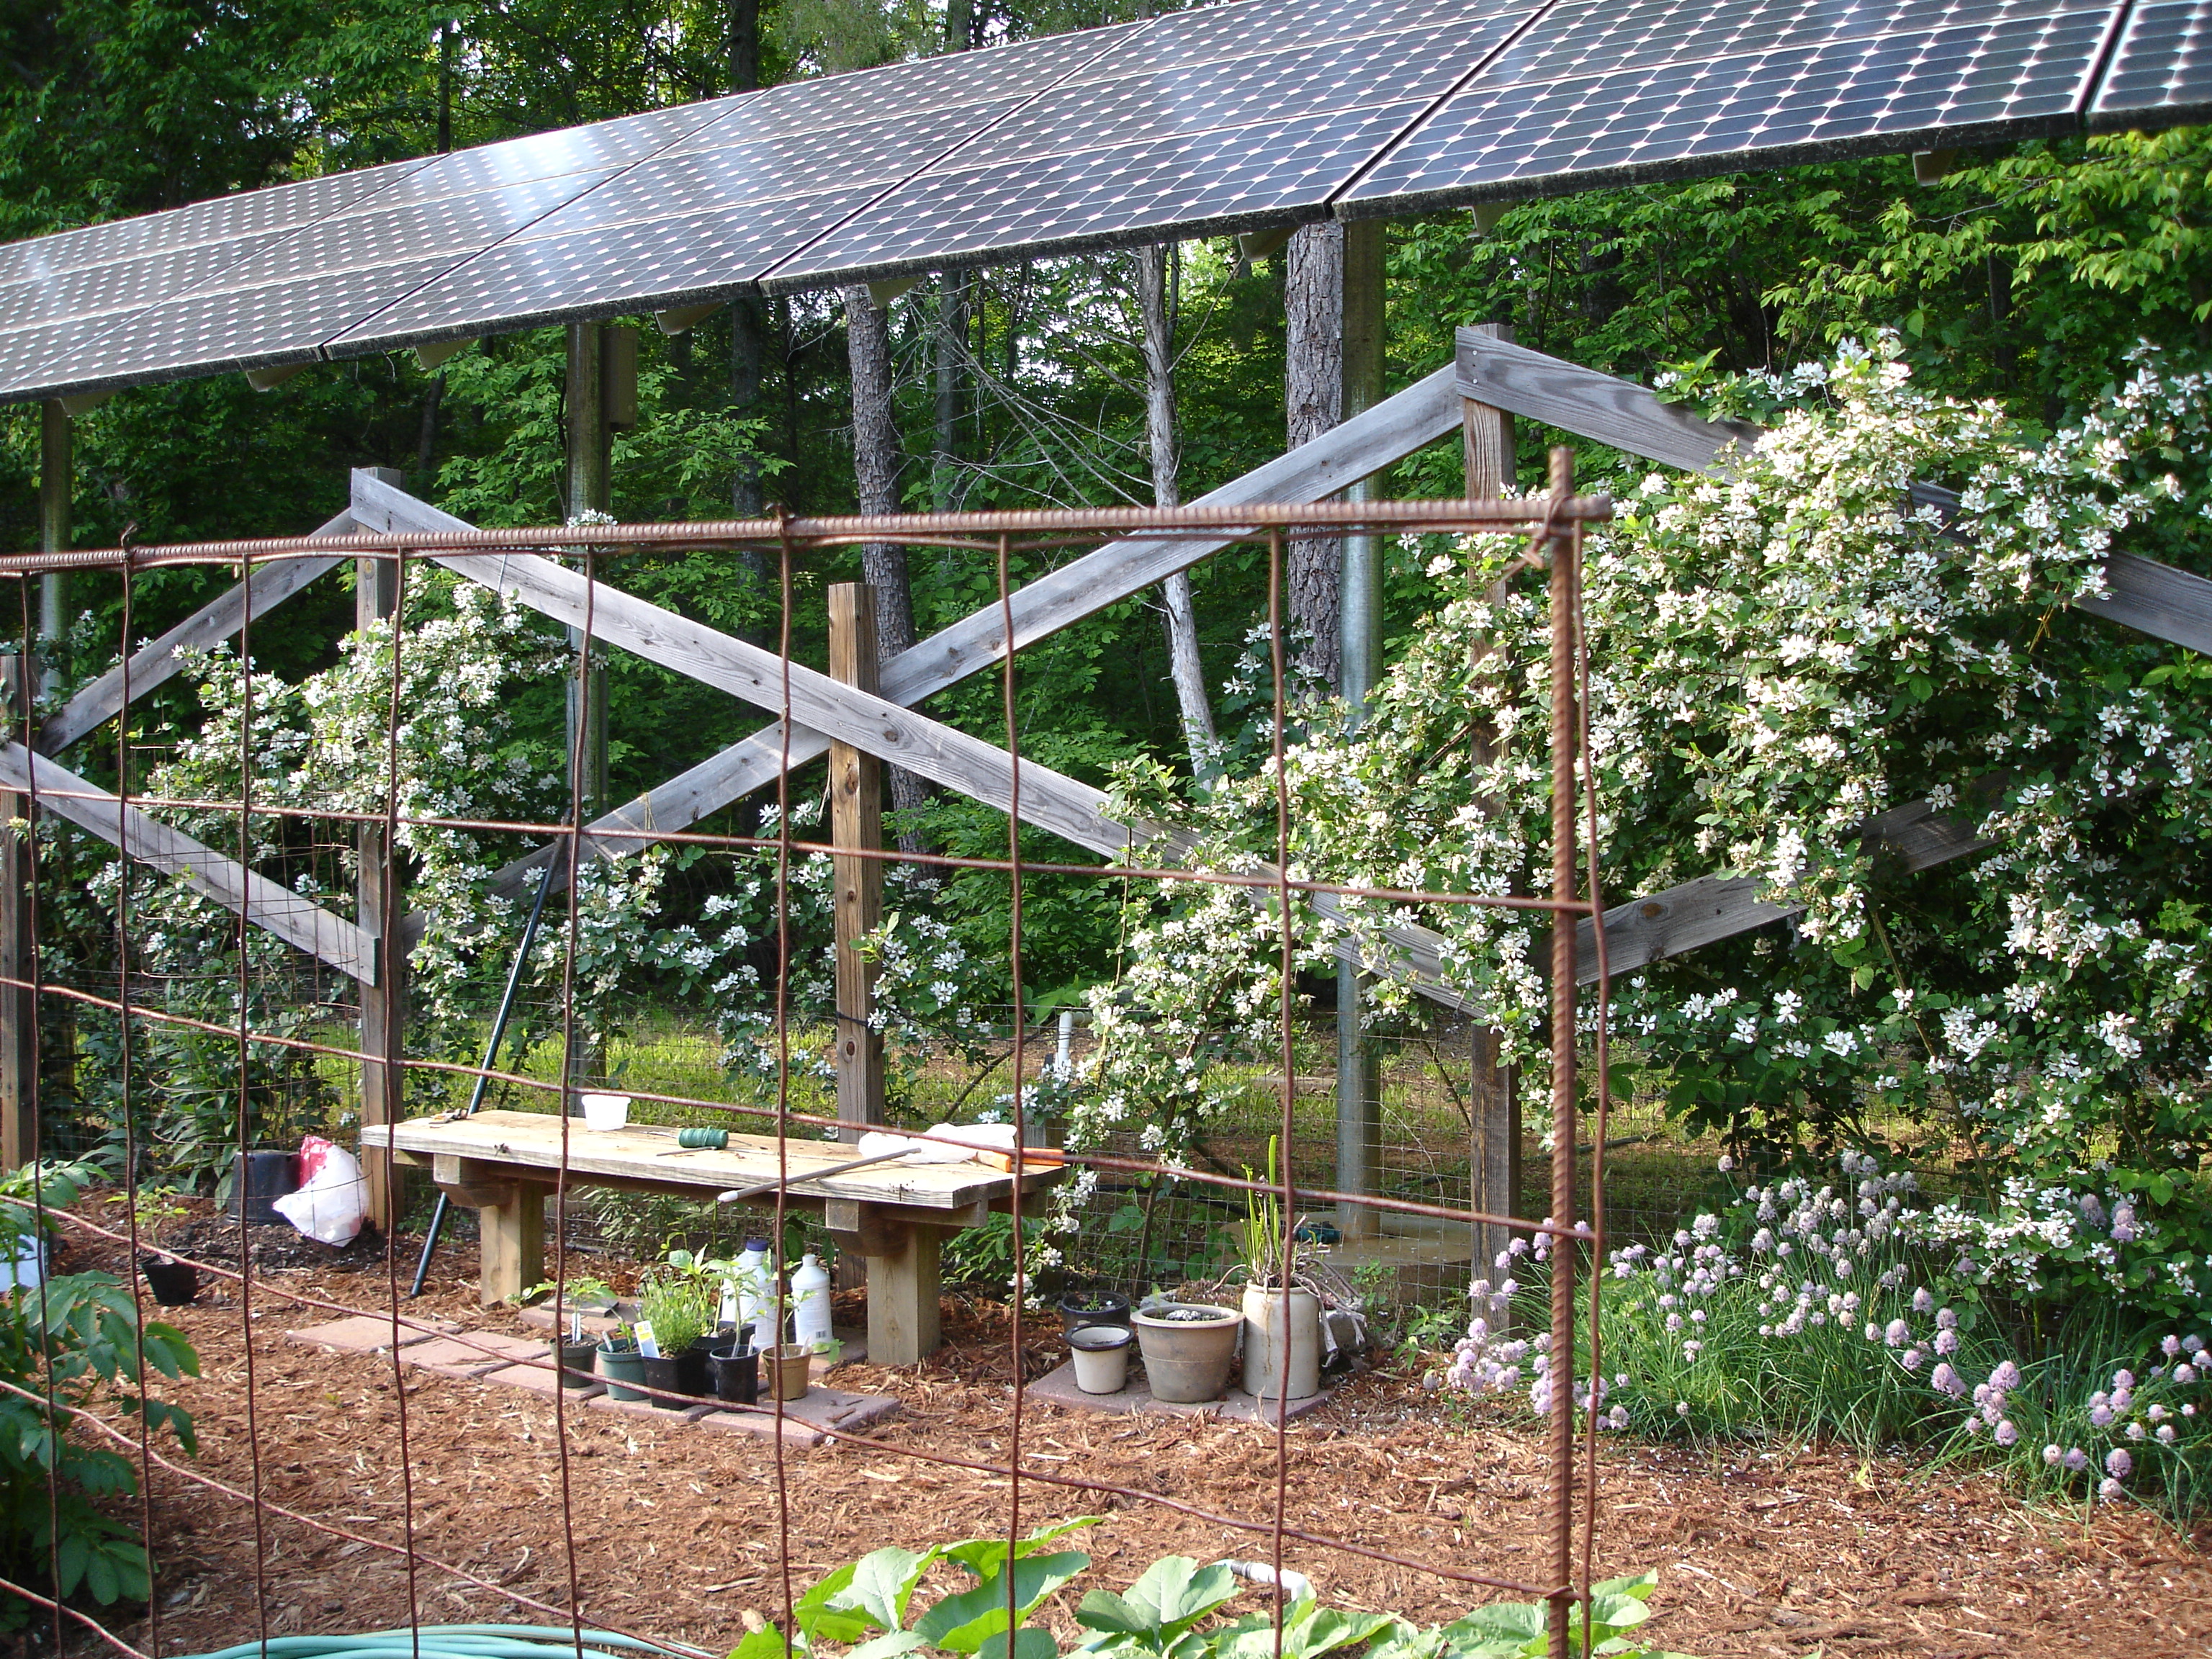 View of a portion of photovoltaic array from inside our garden, resting above garden fence and wild blackberry trellis.  